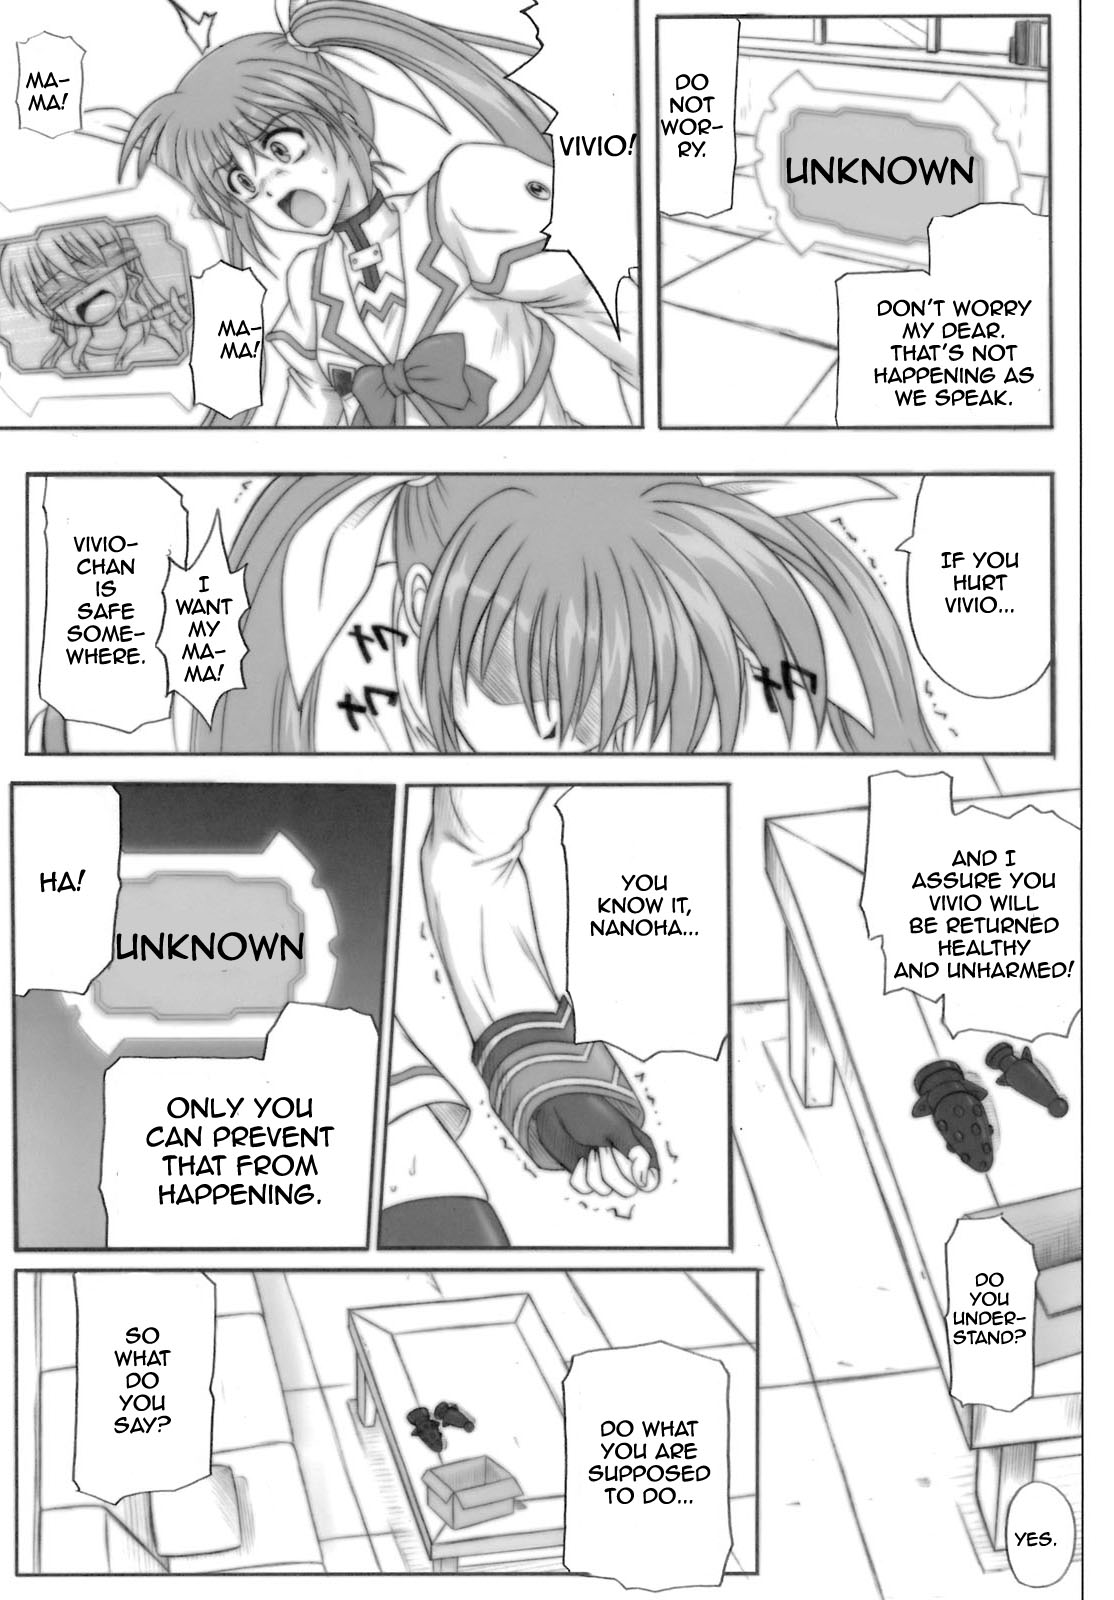 840 Color Classic Situation Note Extention (Mahou Shoujo Lyrical Nanoha) [English] [Rewrite] page 7 full